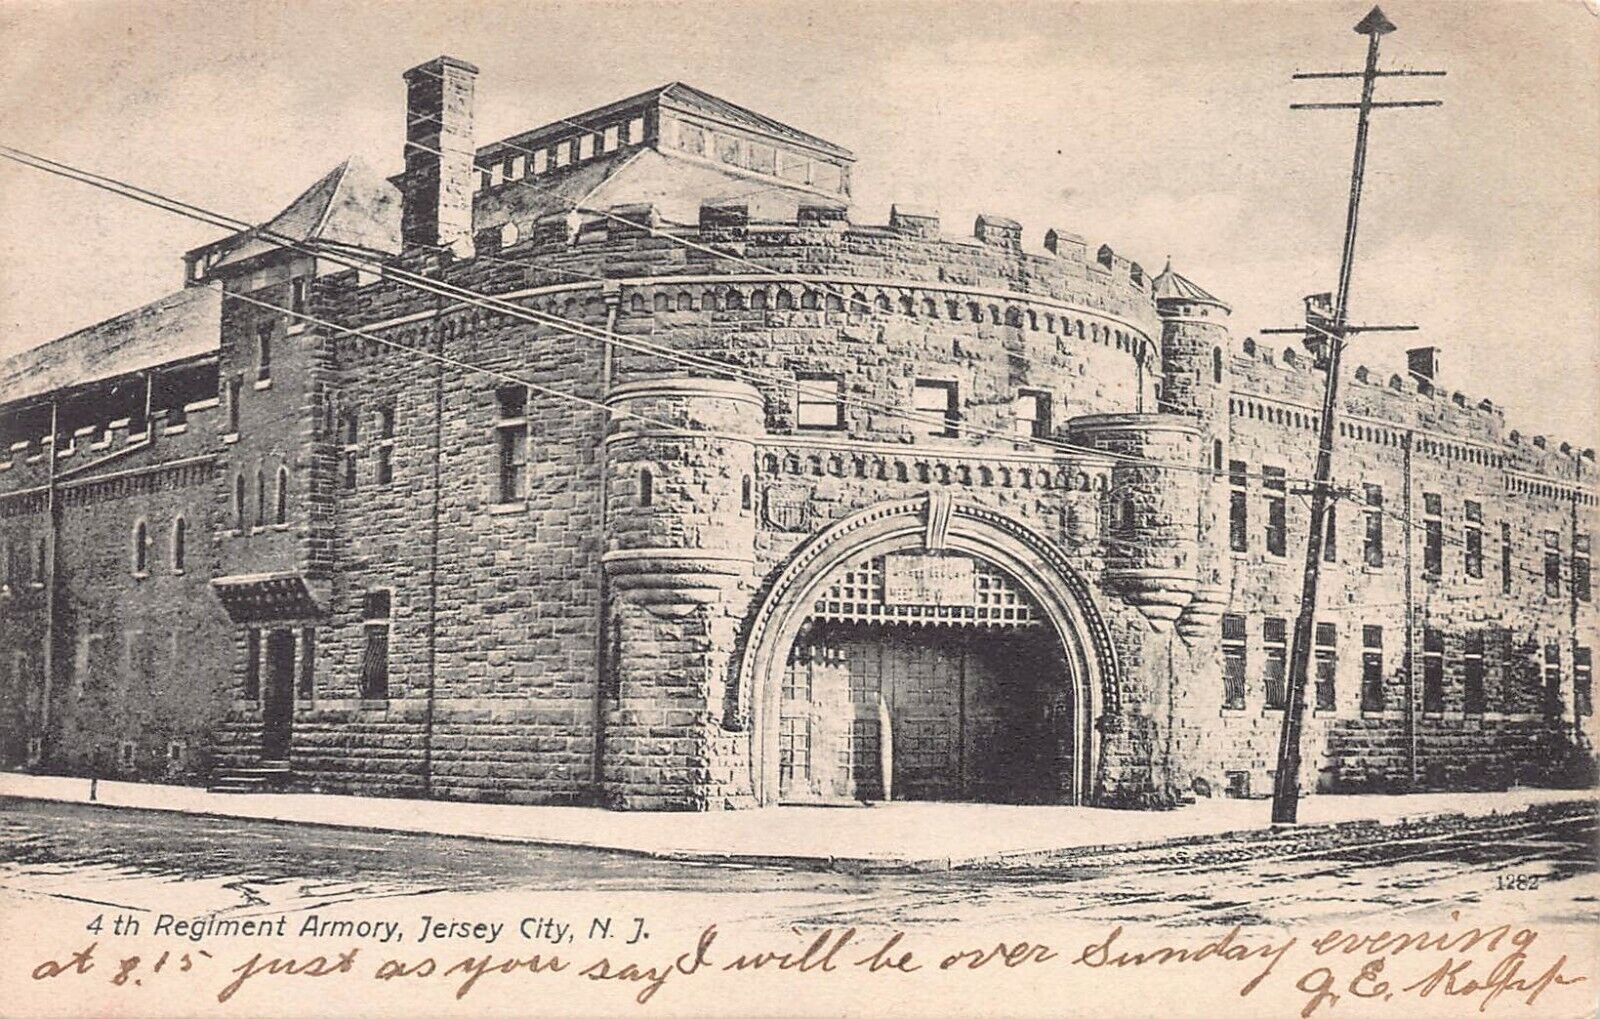 4th Regimental Armory, Jersey City, New Jersey, early postcard, used in 1906